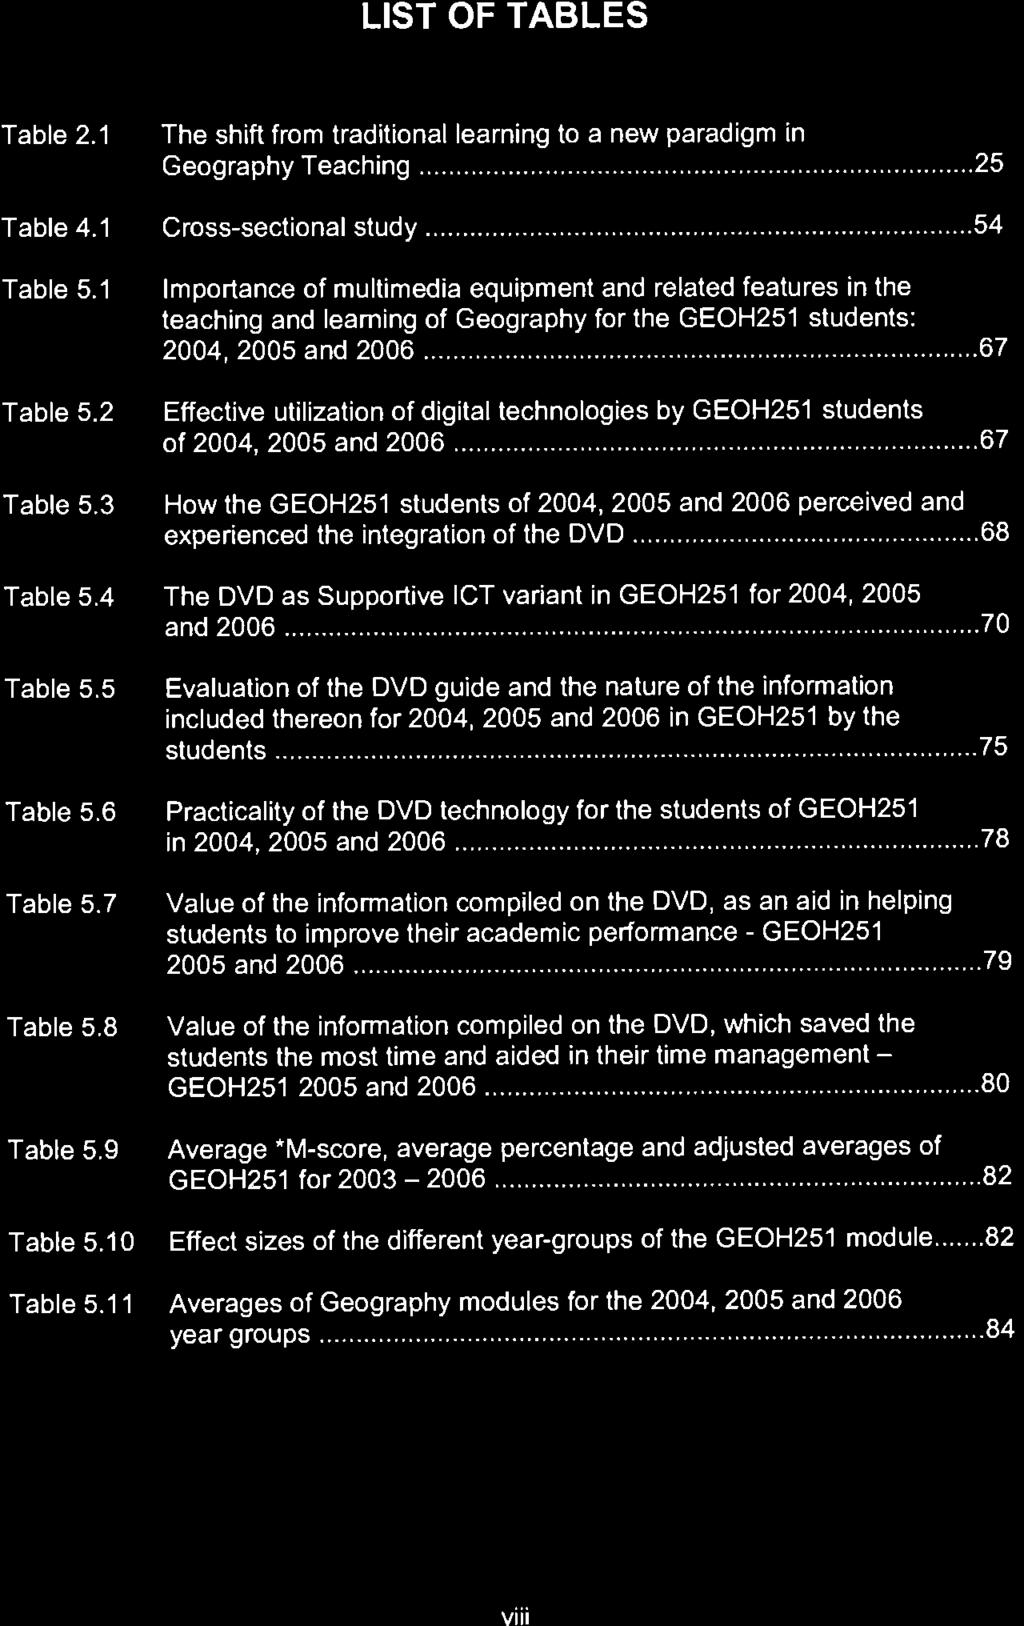 .......,..,,..............,,..,,..,...,. Cross-sectional study.........................................................,............ 54 Importance of multimedia equipment and related features in the teaching and learning of Geography for the GEOH251 students: 2004, 2005 and 2006.